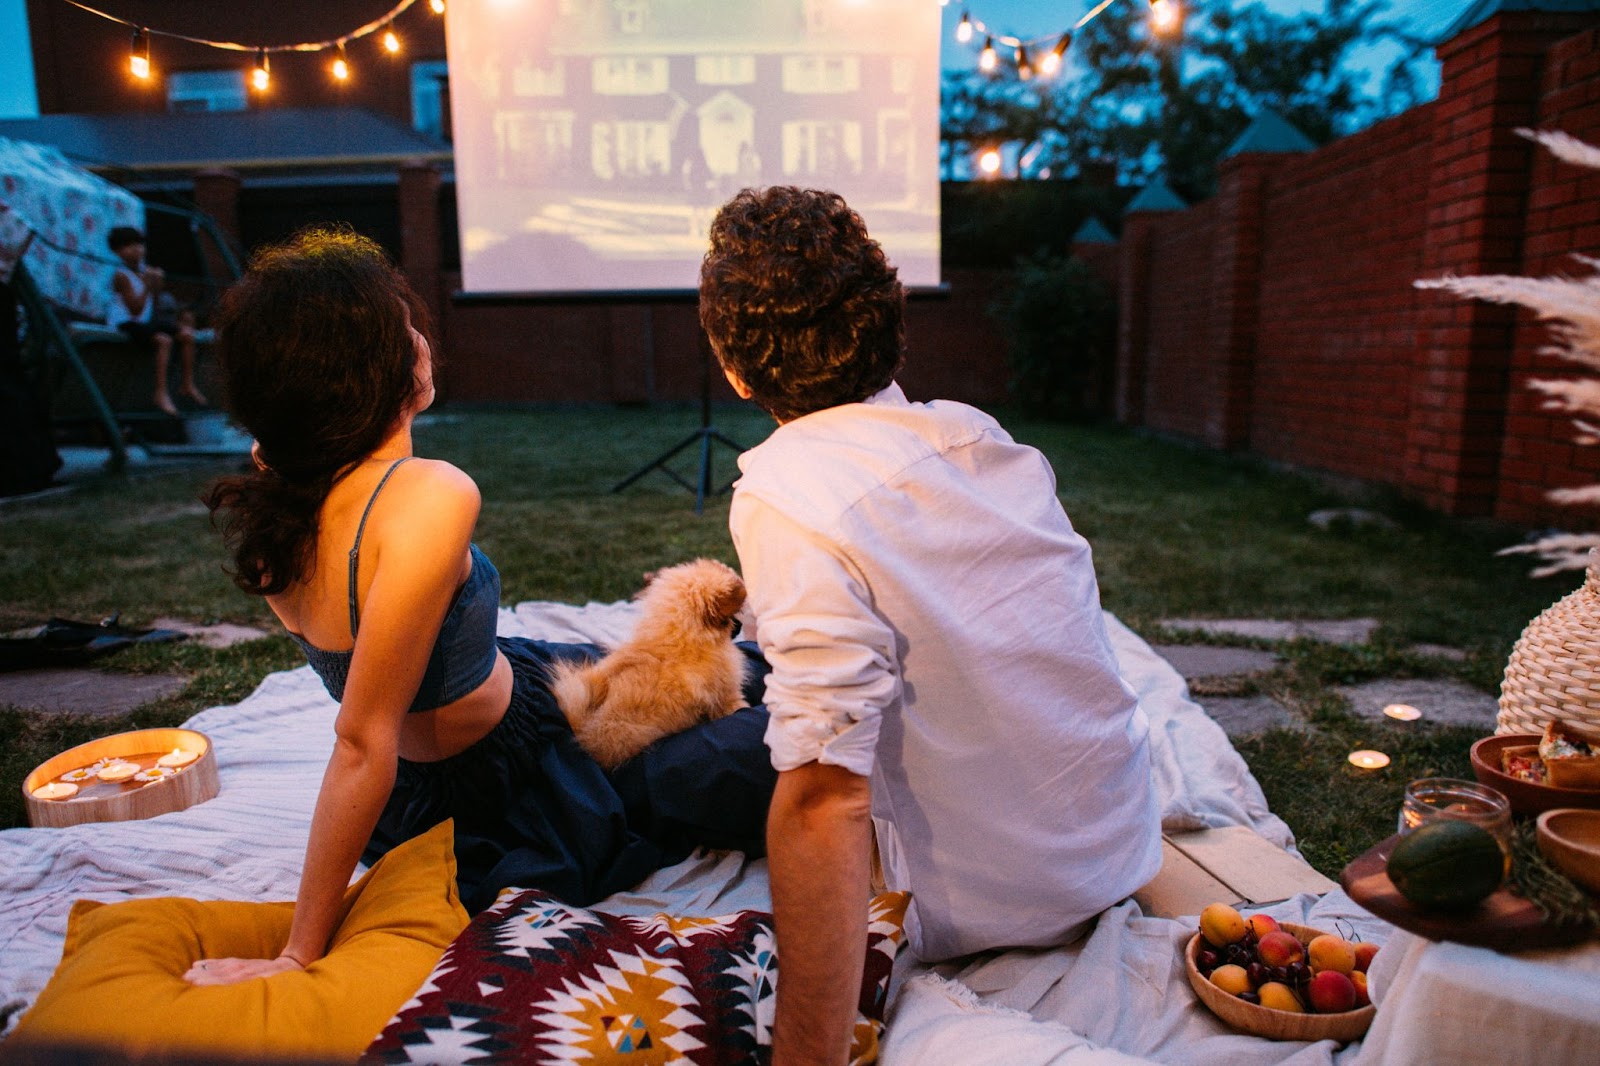 A couple watching a movie on a blanket in a backyard.